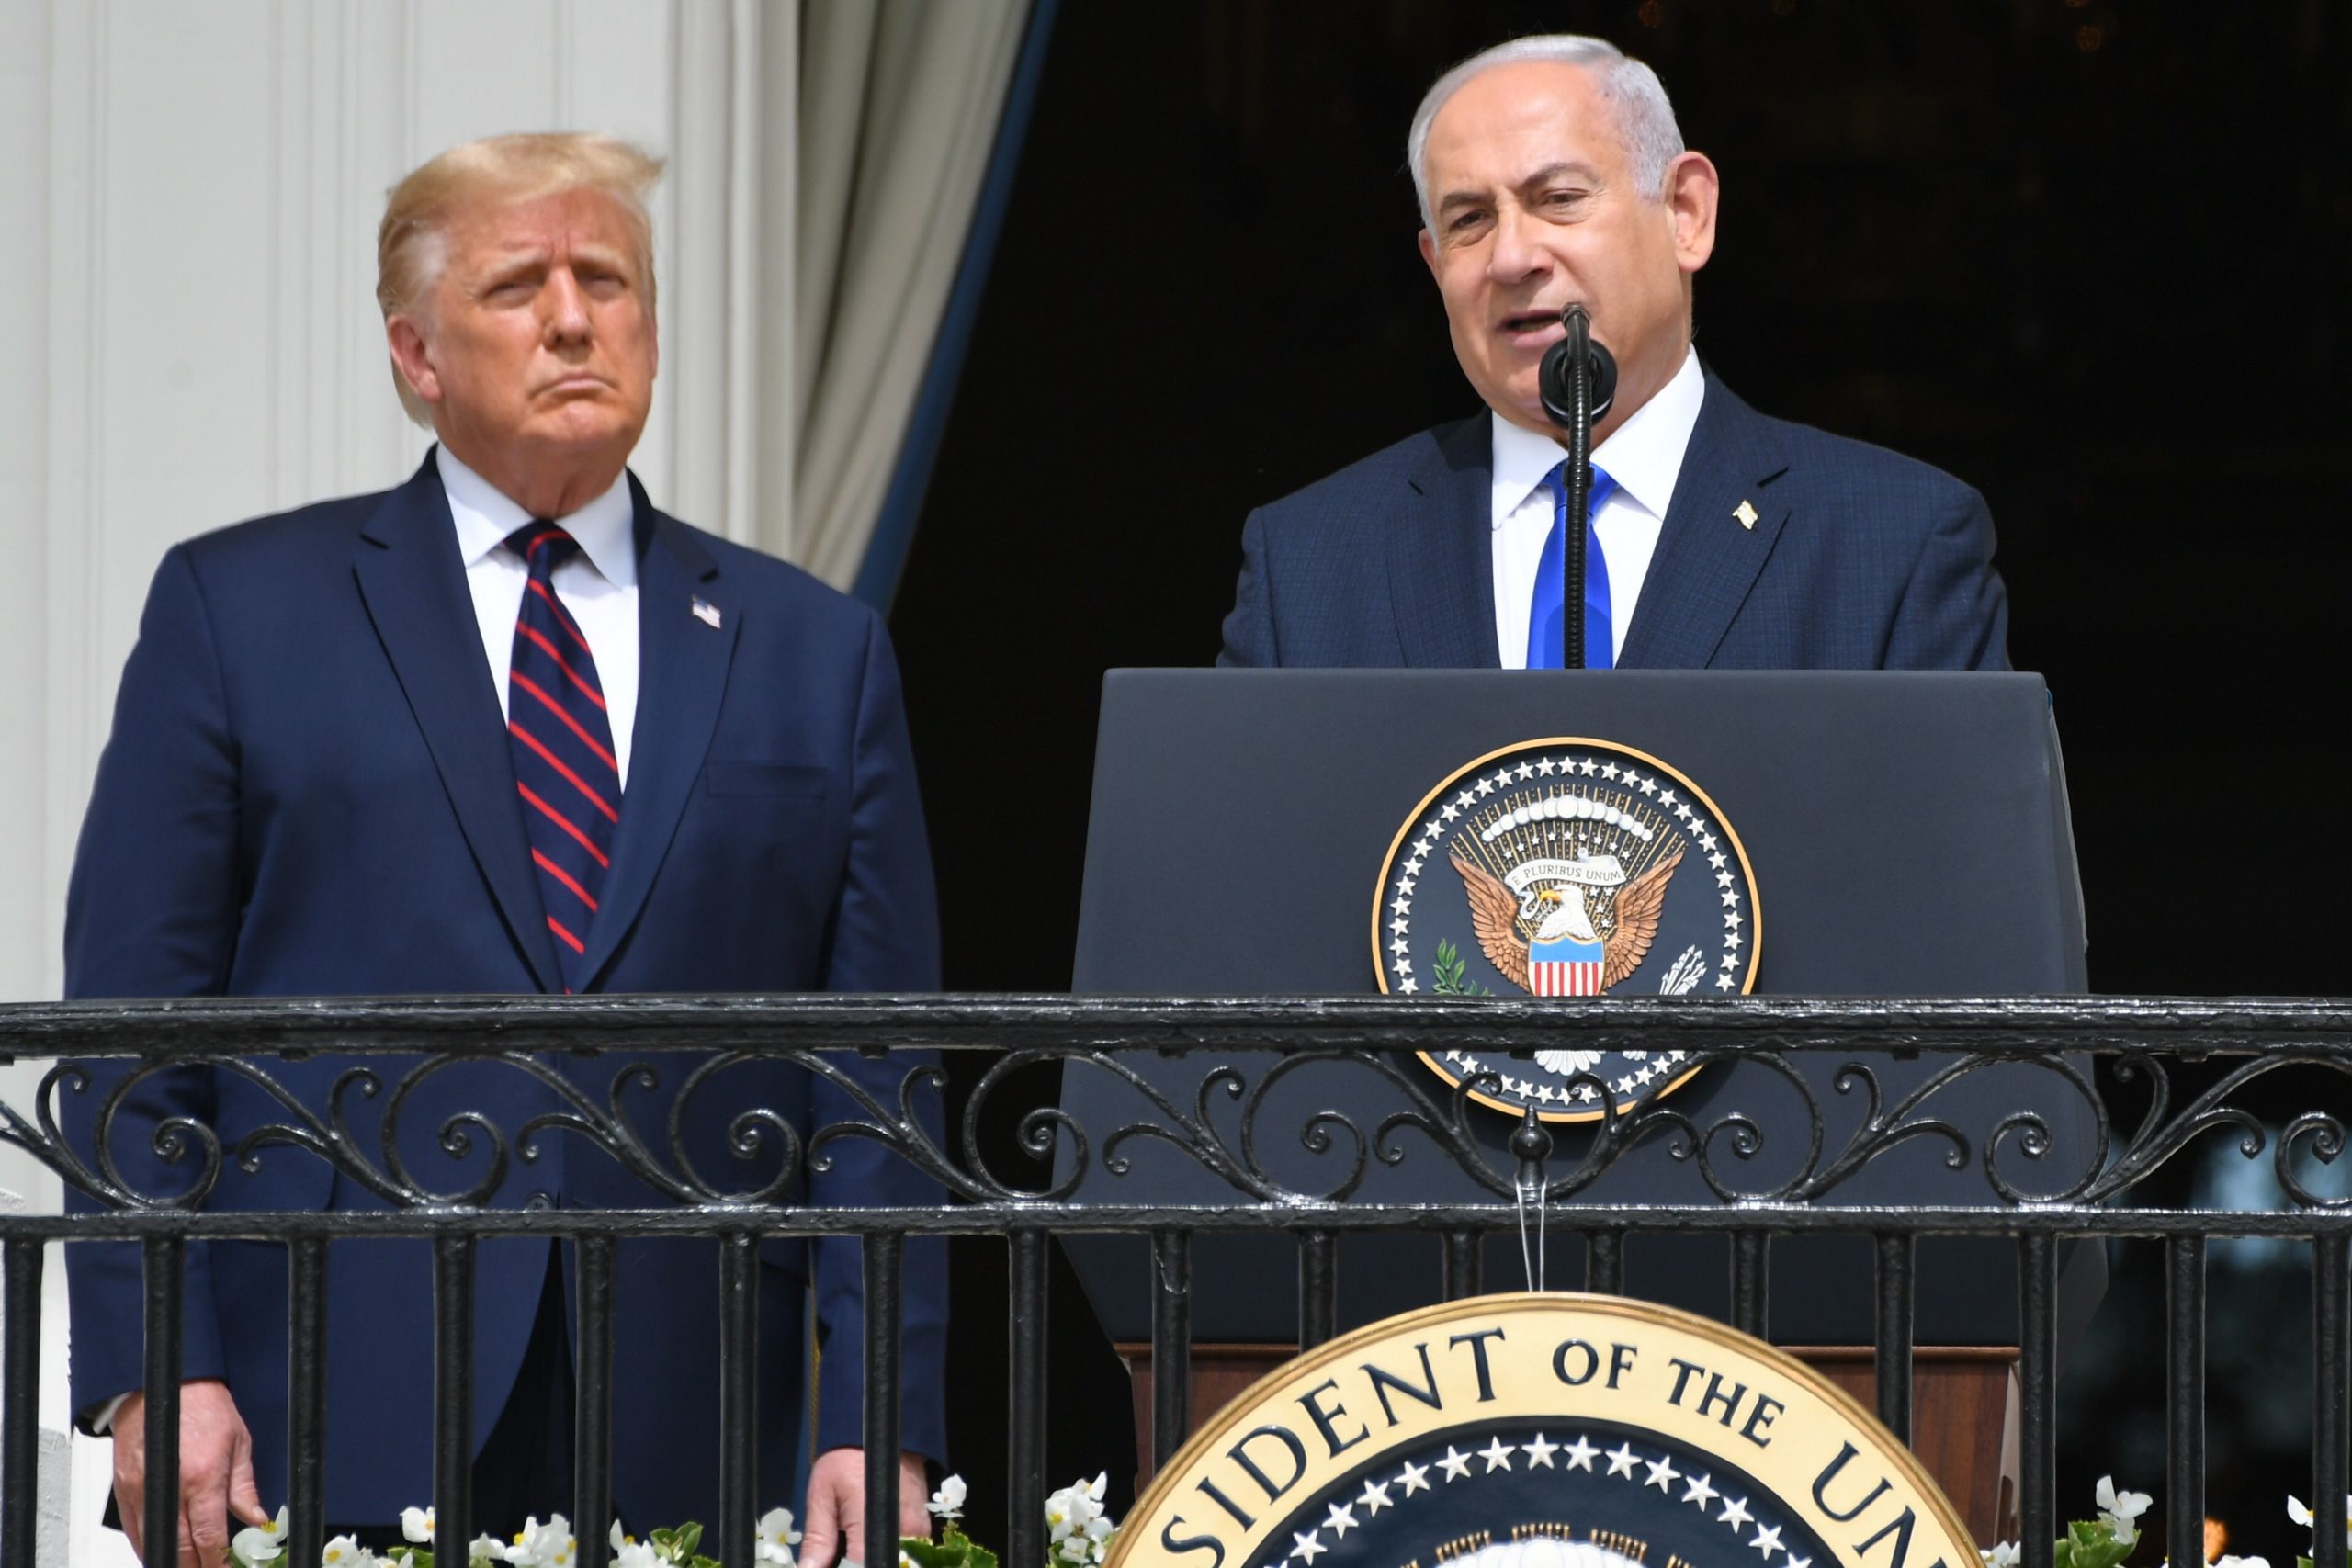 US President Donald Trump watches as Israeli Prime Minister Benjamin Netanyahu (R) speaks from the Truman Balcony at the White House during the signing ceremony of the Abraham Accords